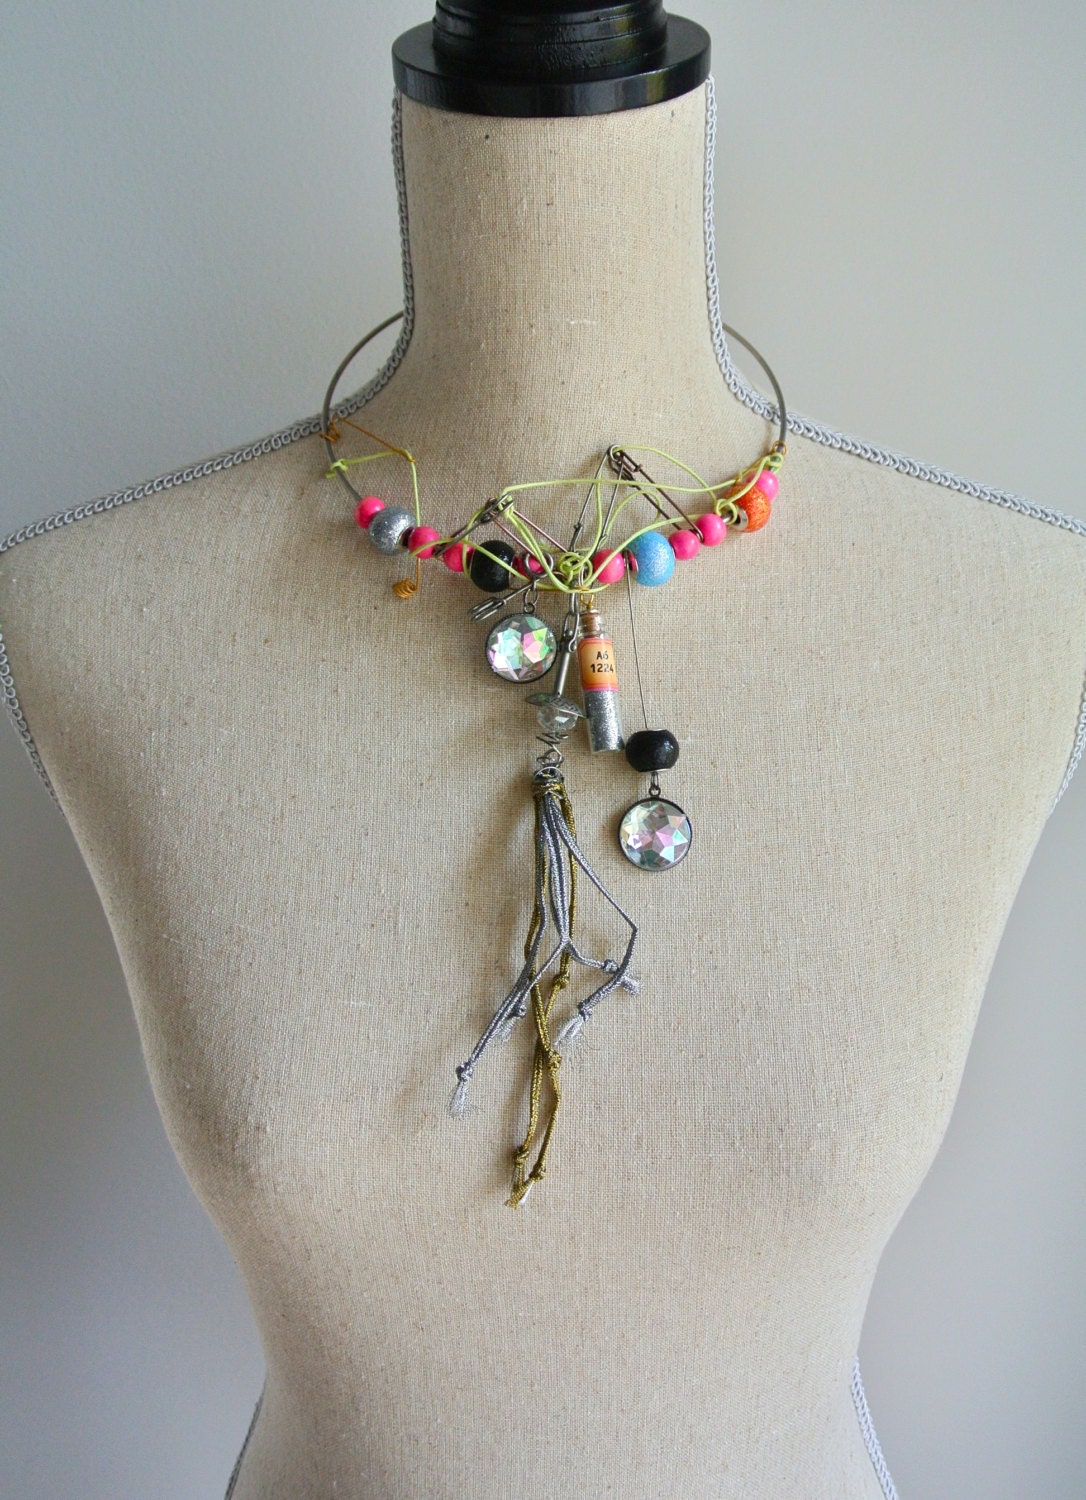 Metalwork and Bead Choker with Charms, No.1 - JNoliciousThings